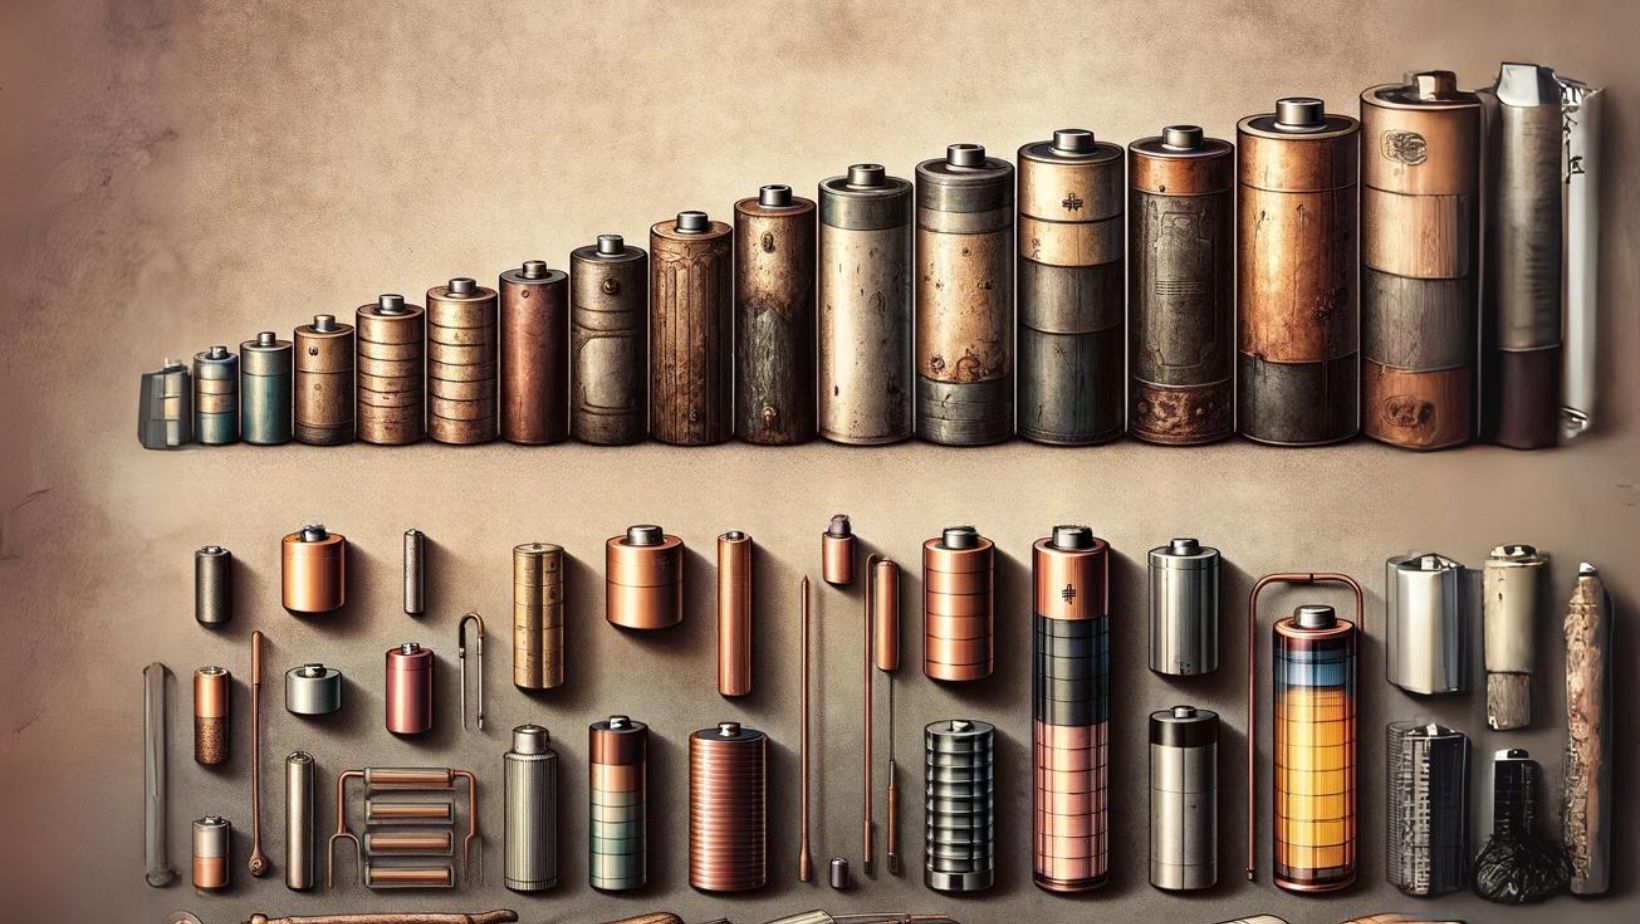 The evolution of battery technologies